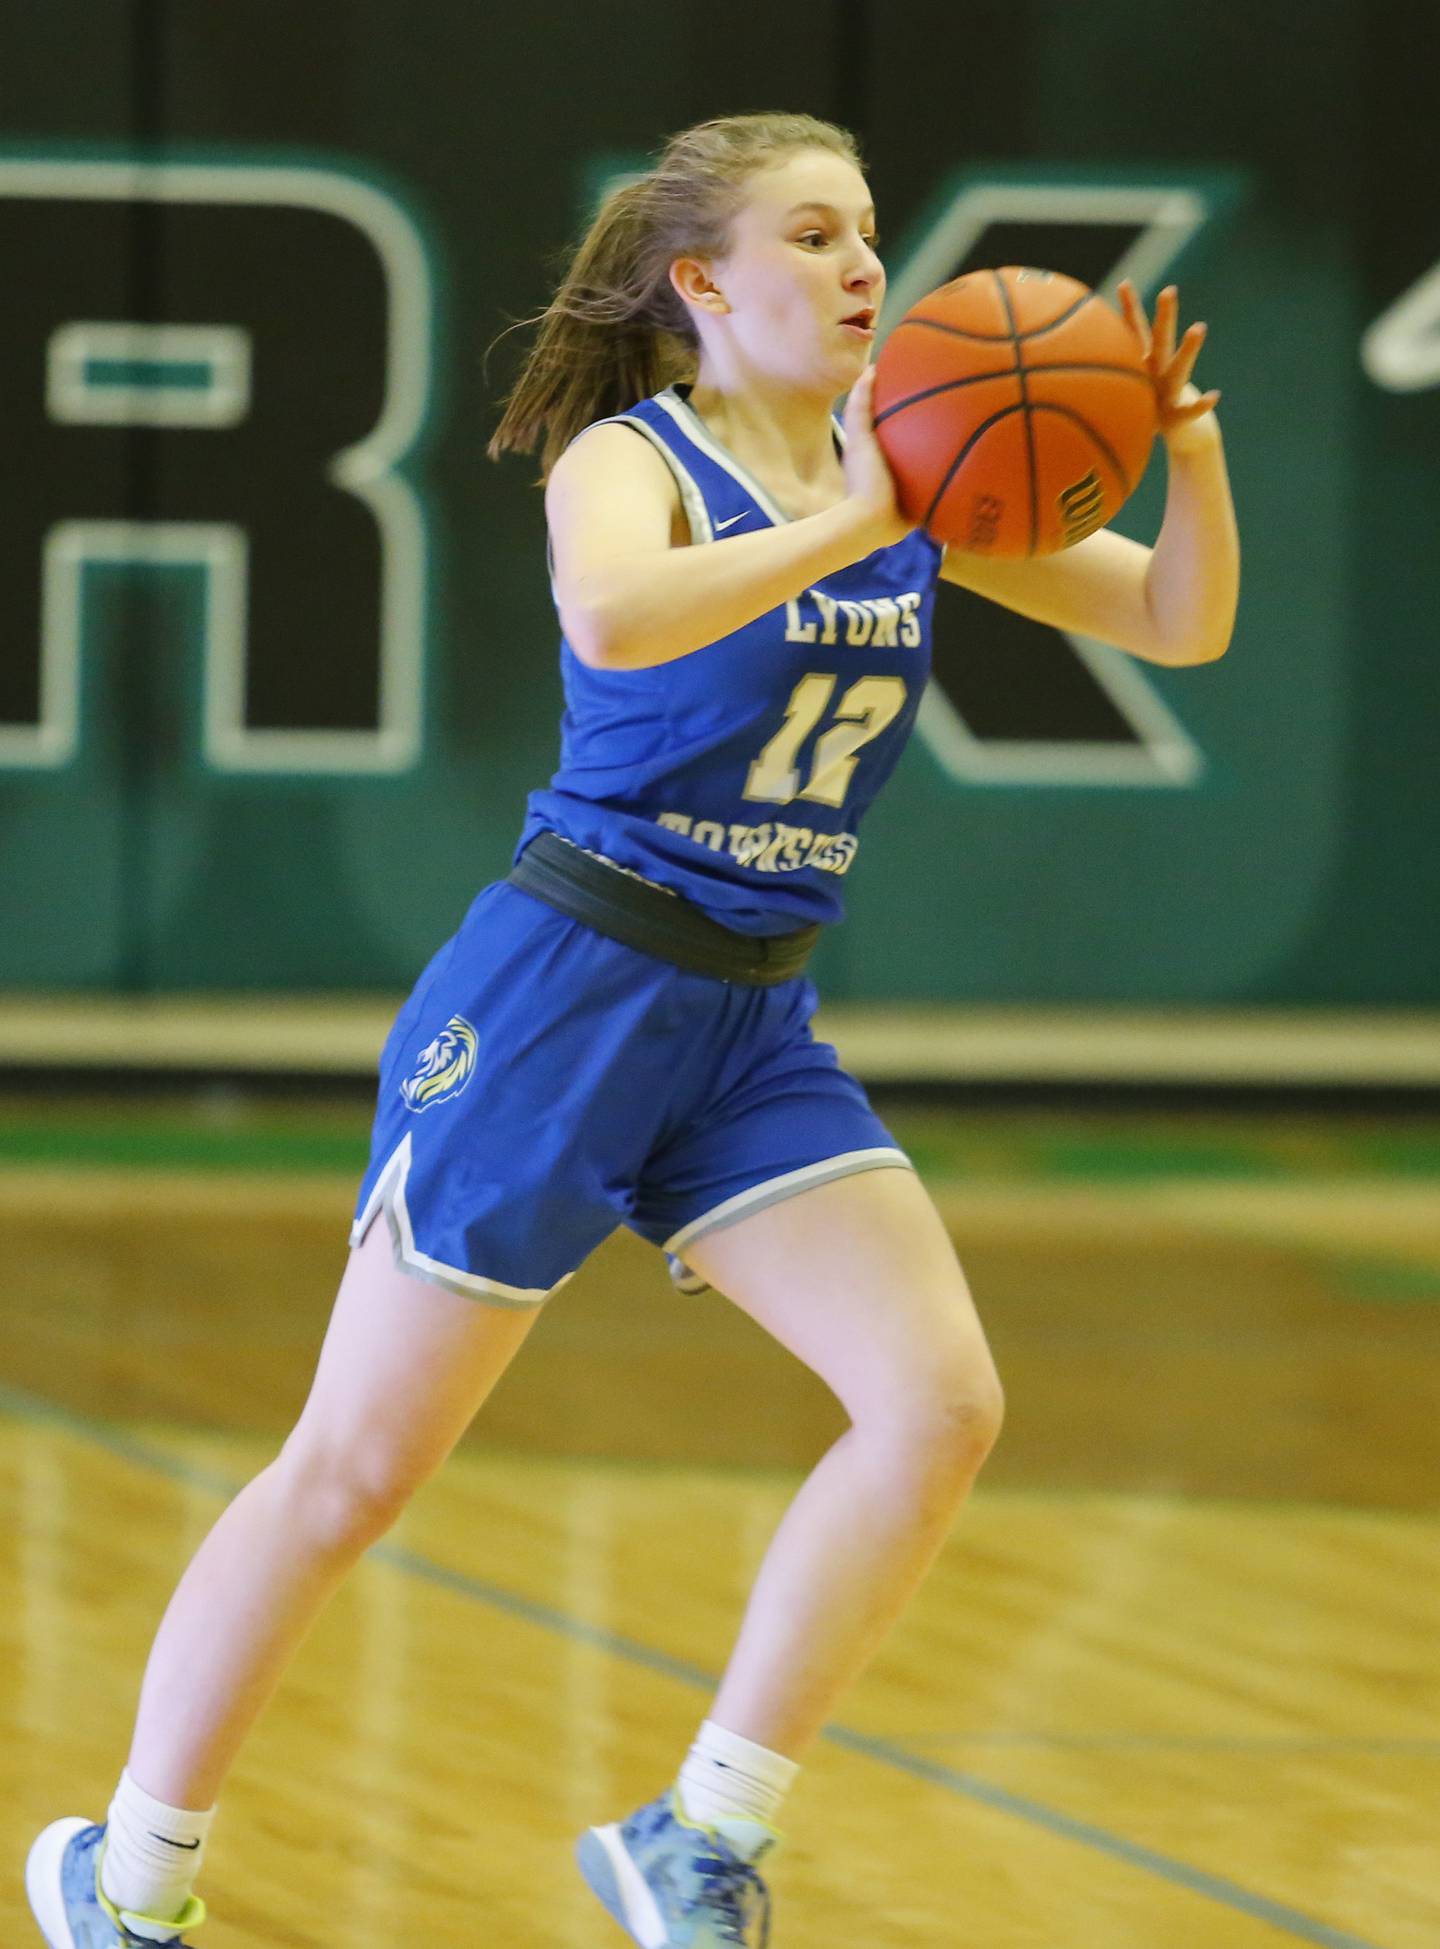 Lyons' Avery Mezan (12) passes during the girls varsity basketball game between Lyons Township and York high schools on Friday, Dec. 16, 2022 in Elmhurst, IL.